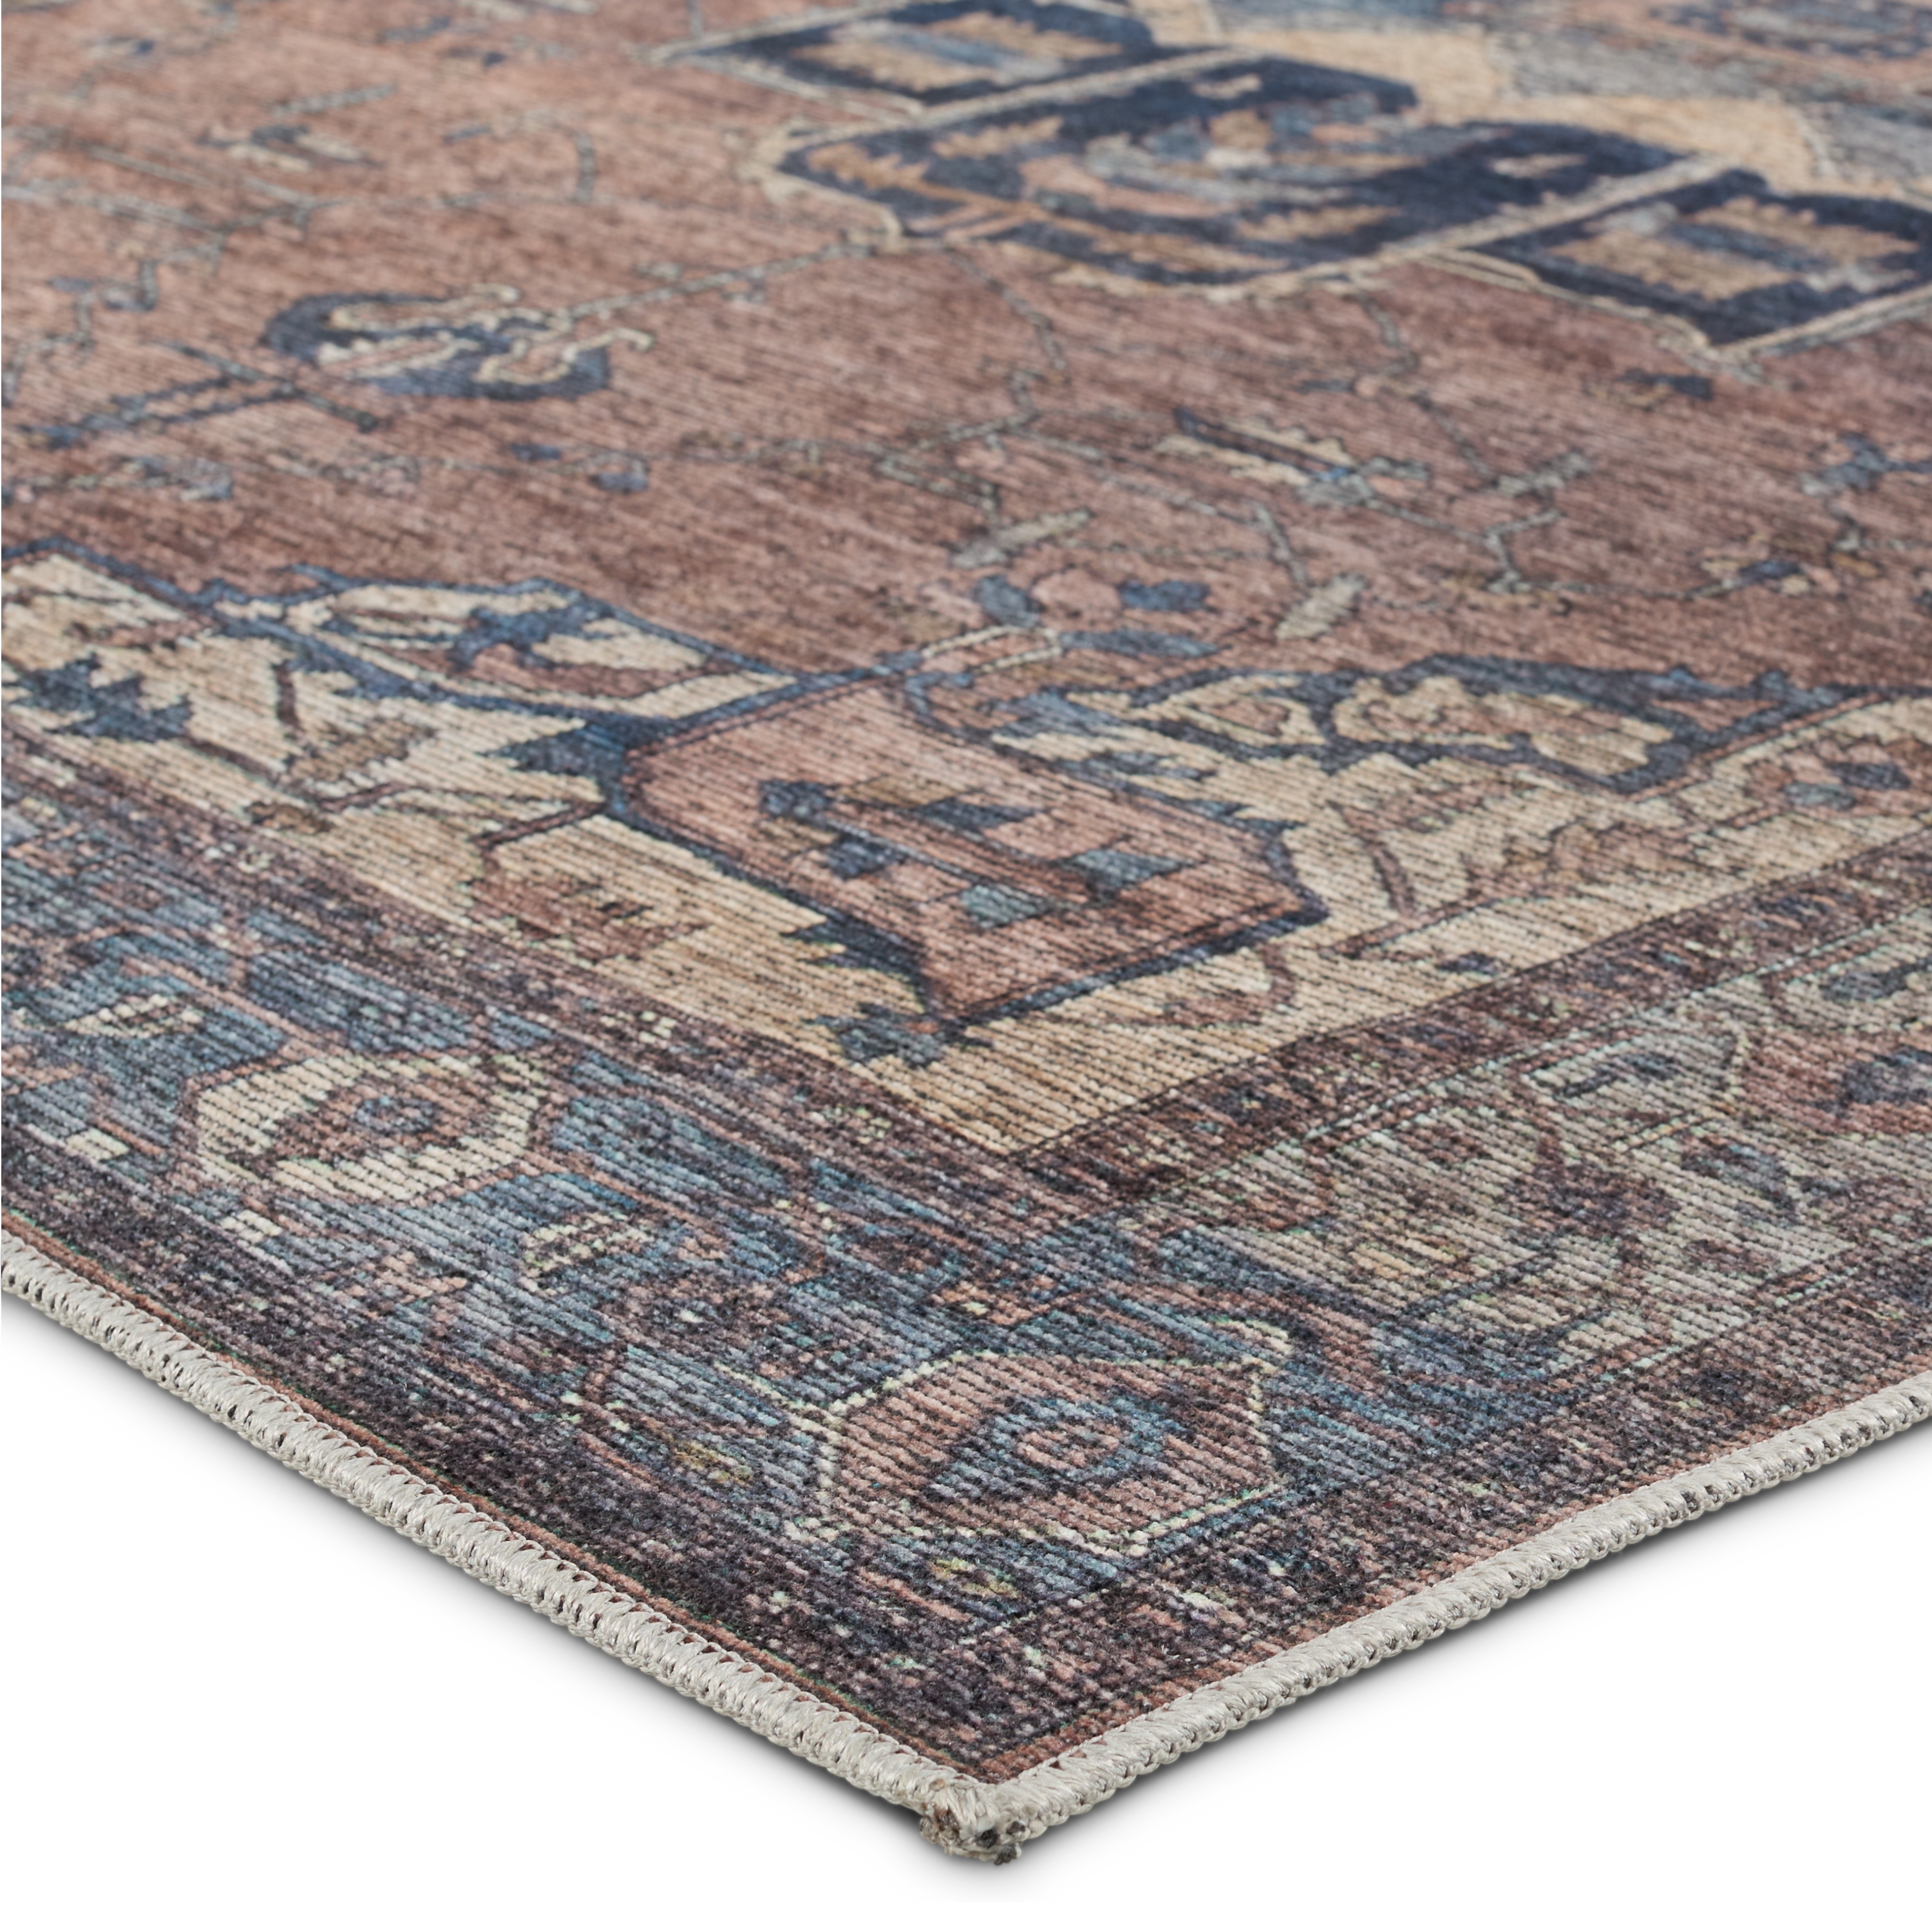 Vibe by Barrymore Medallion Blue/ Dark Brown Area Rug (7'10"X10') - Image 1